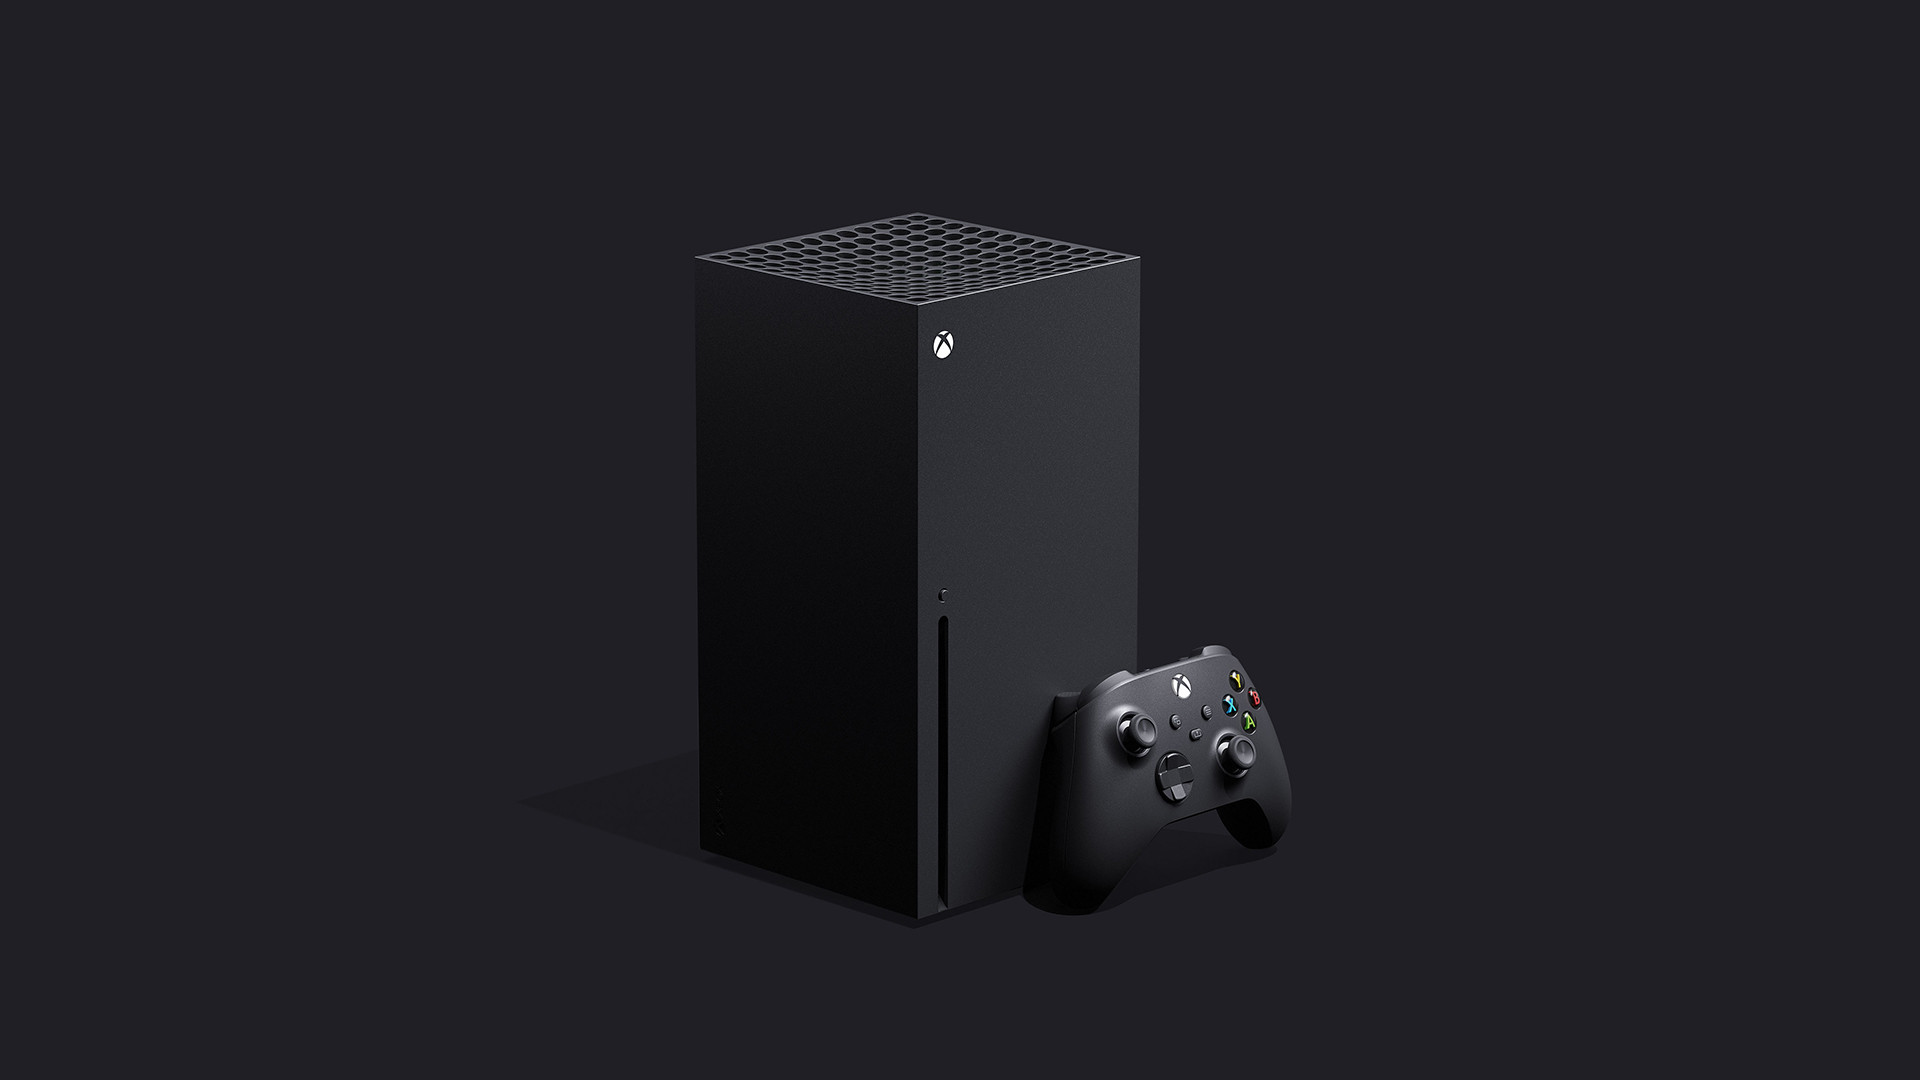 Xbox Series X Gets A Known List Of Issues And Fixes Including For No Signal Issue